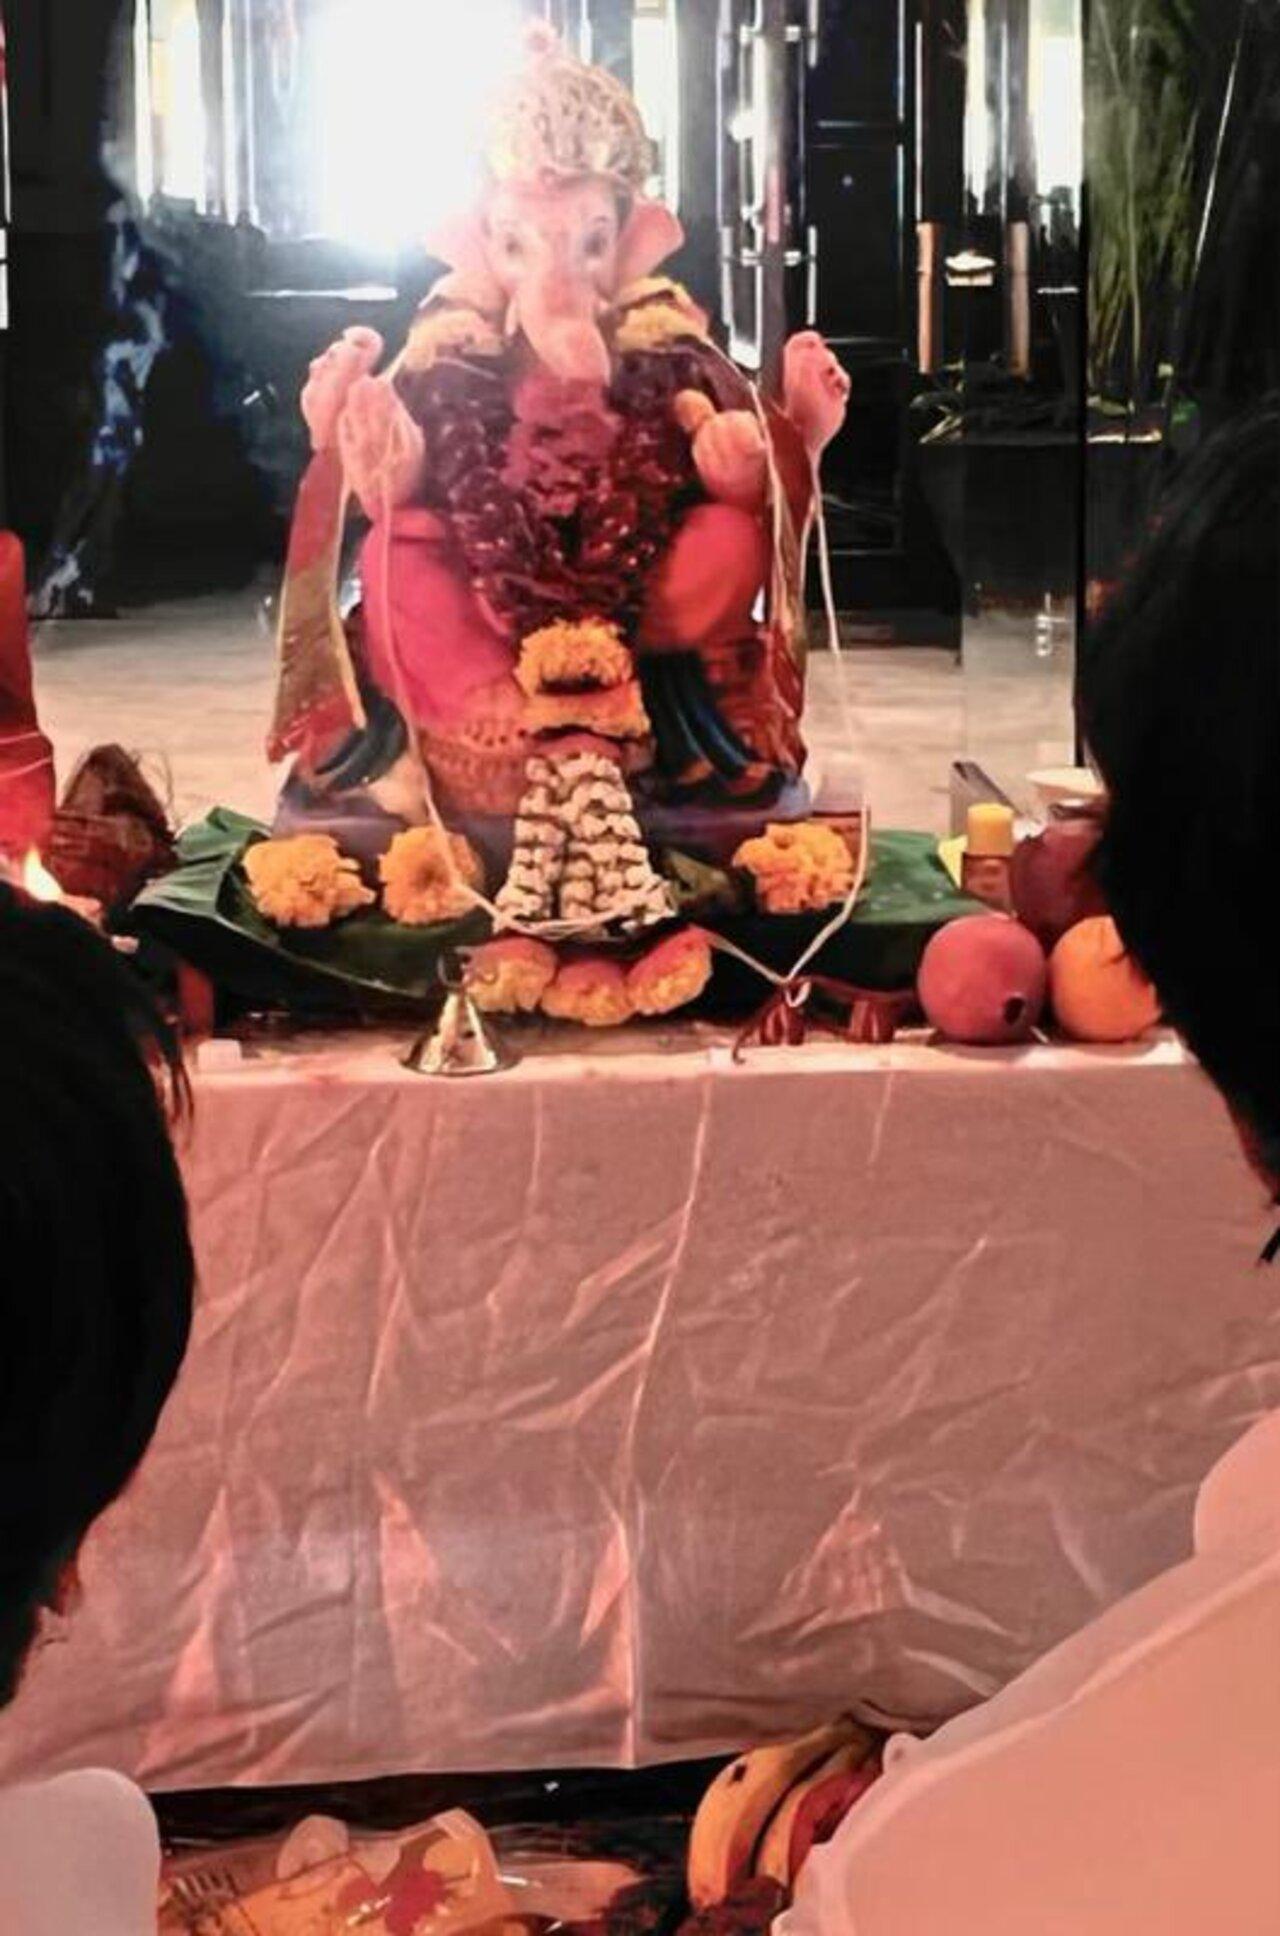 Shah Rukh Khan celebrates Ganesh Chaturthi with his family at Mannat. Every year, he and his children give the Lord of Wisdom a traditional welcome. They have a low-key celebration